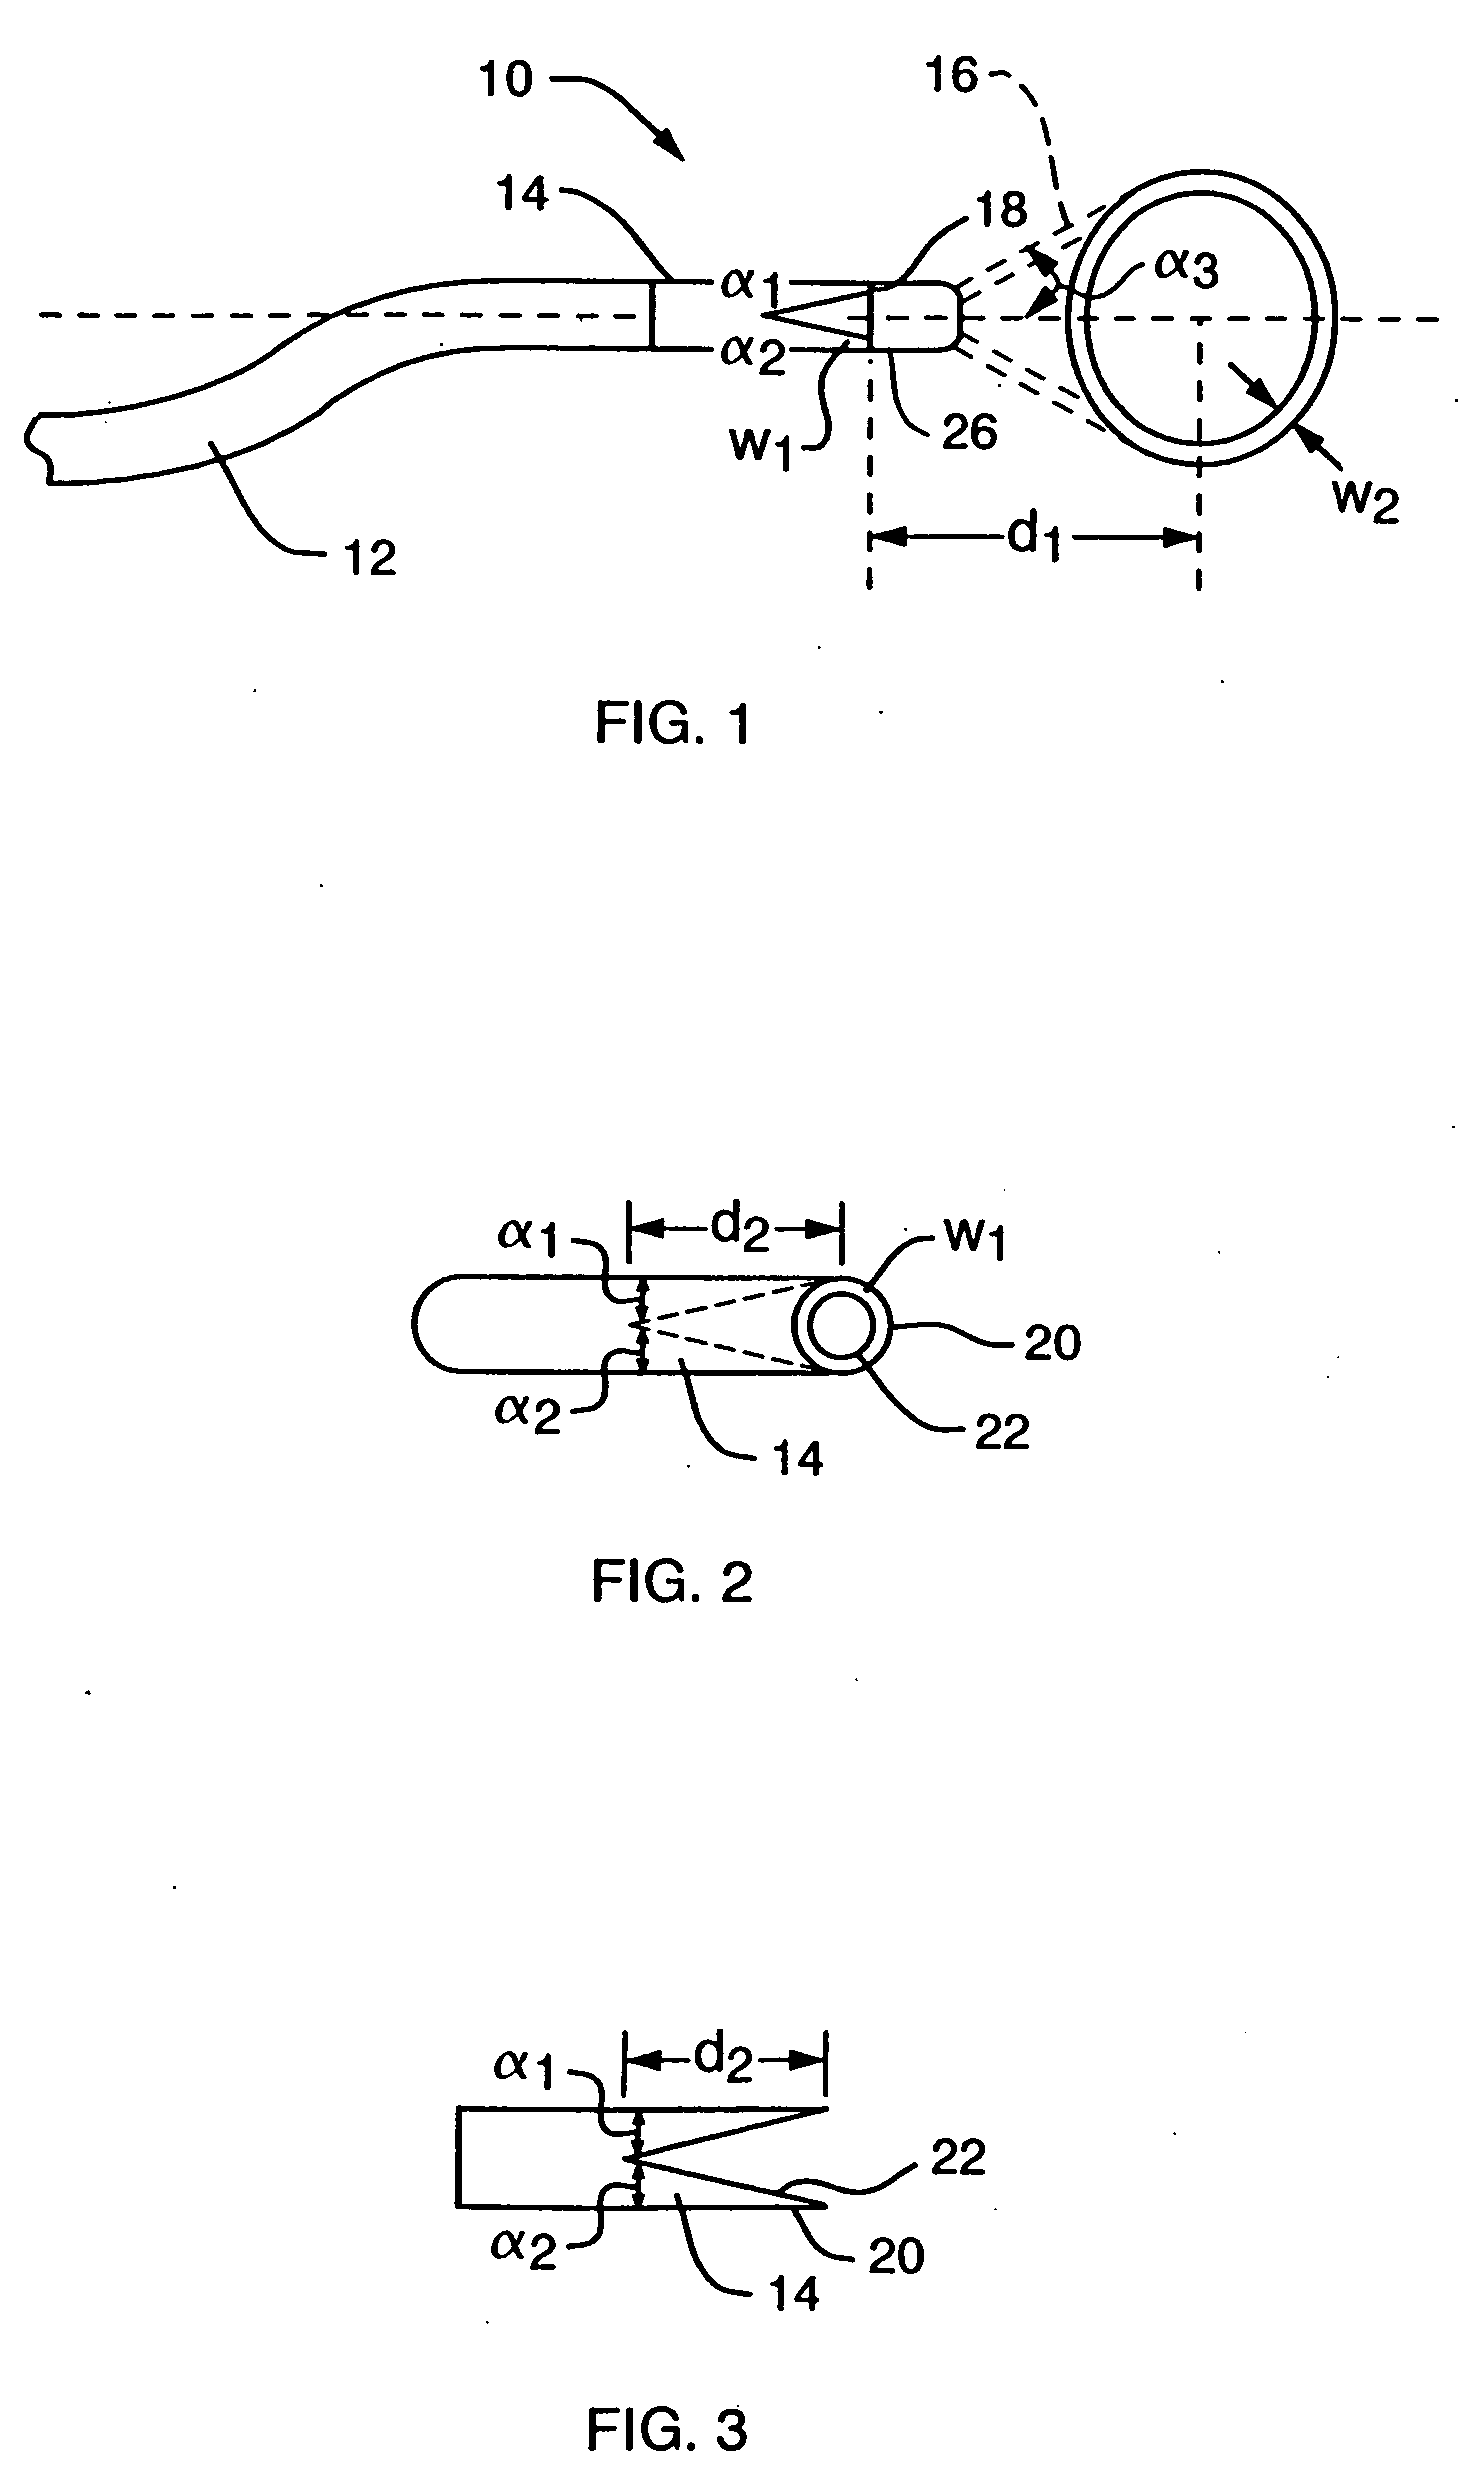 Phototherapeutic wave guide apparatus